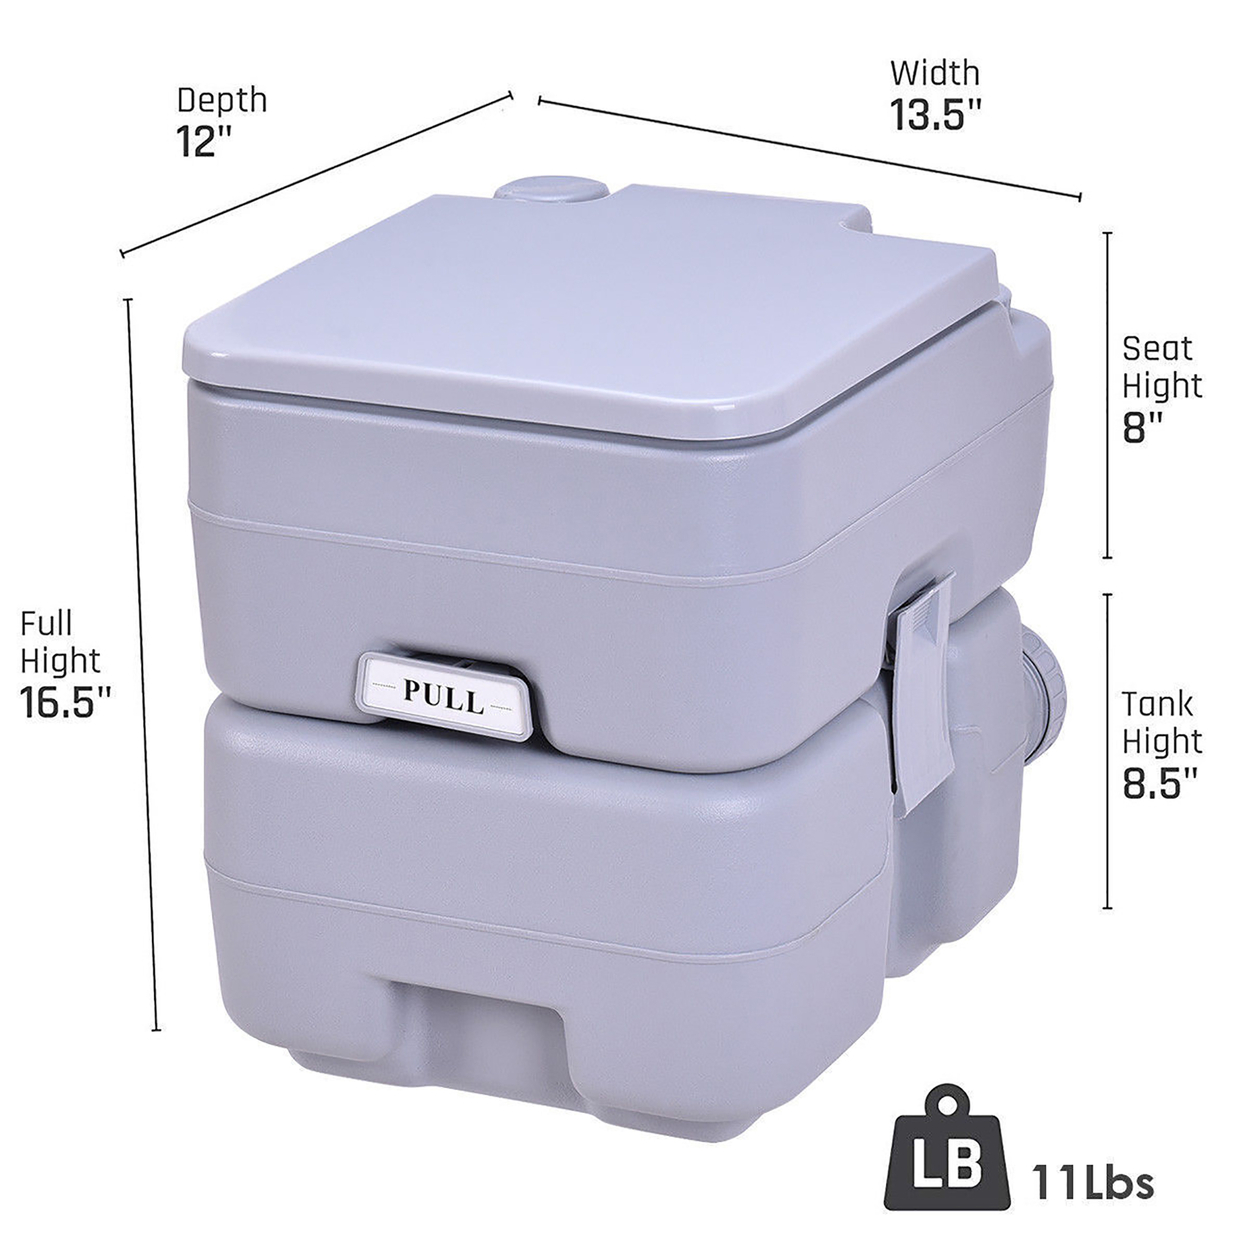 5.3 Gallon 20L Portable Toilet Flush Travel Camping Outdoor/Indoor Potty Commode